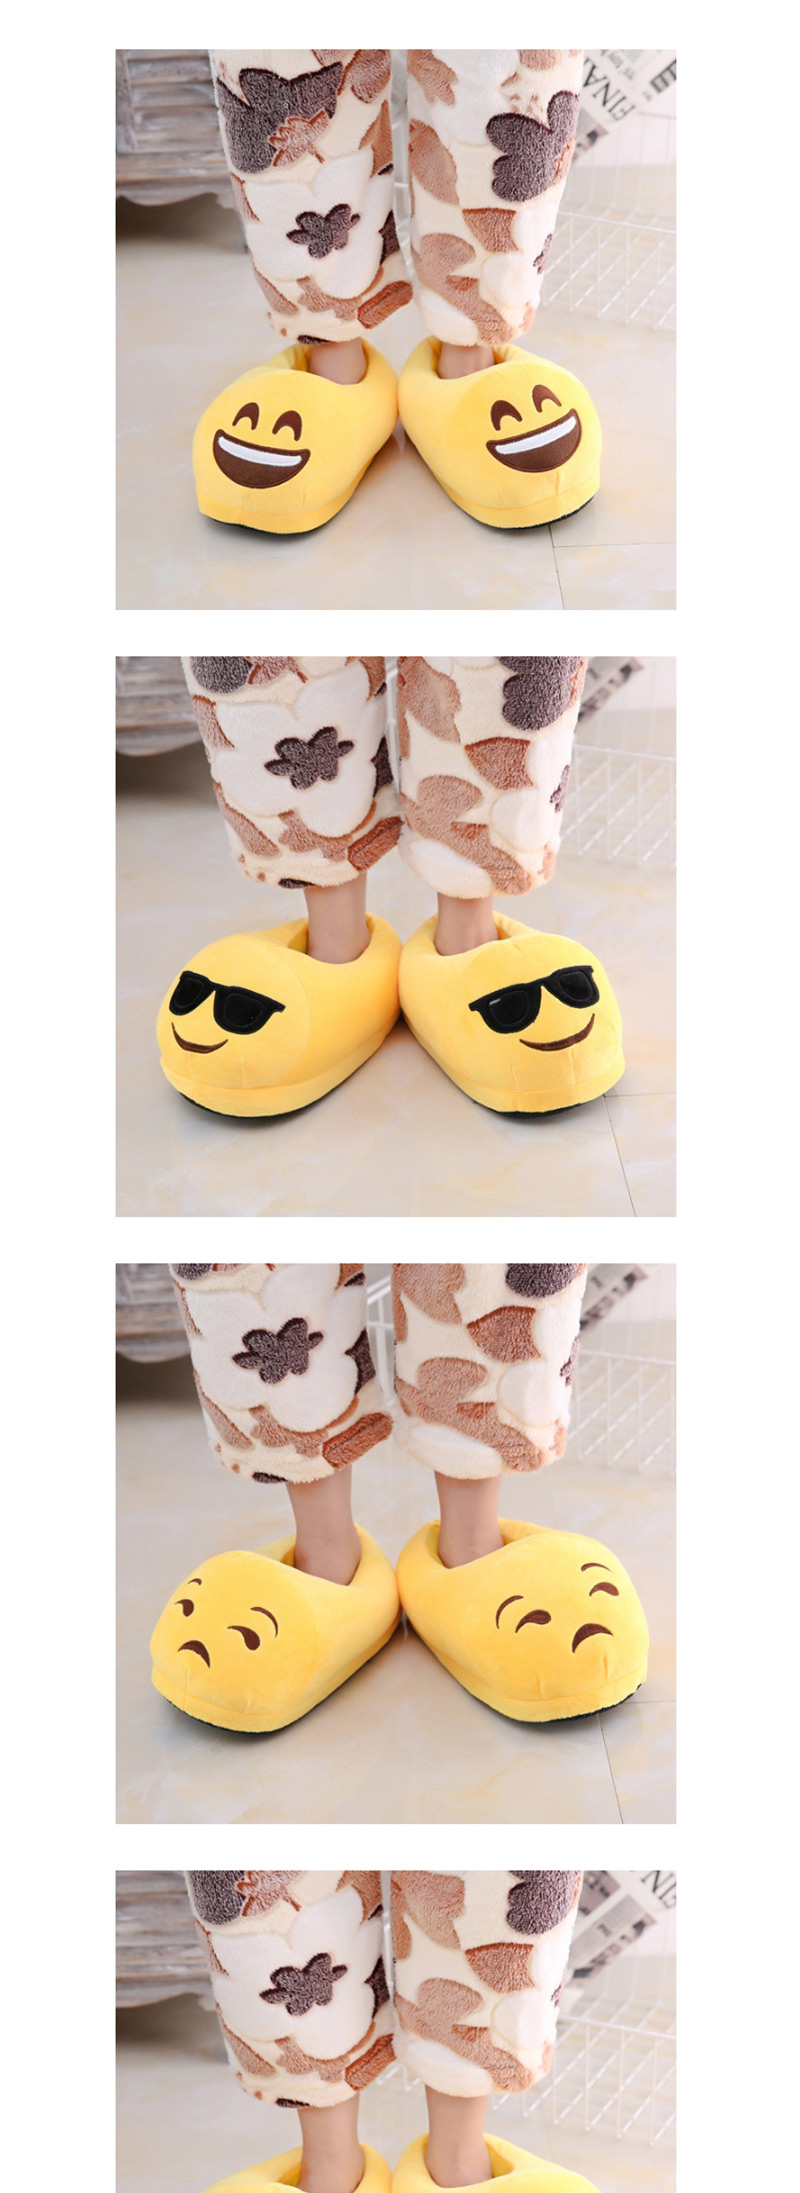 Fashion 10 Yellow Grin Cartoon Expression Plush Bag With Cotton Slippers,Slippers